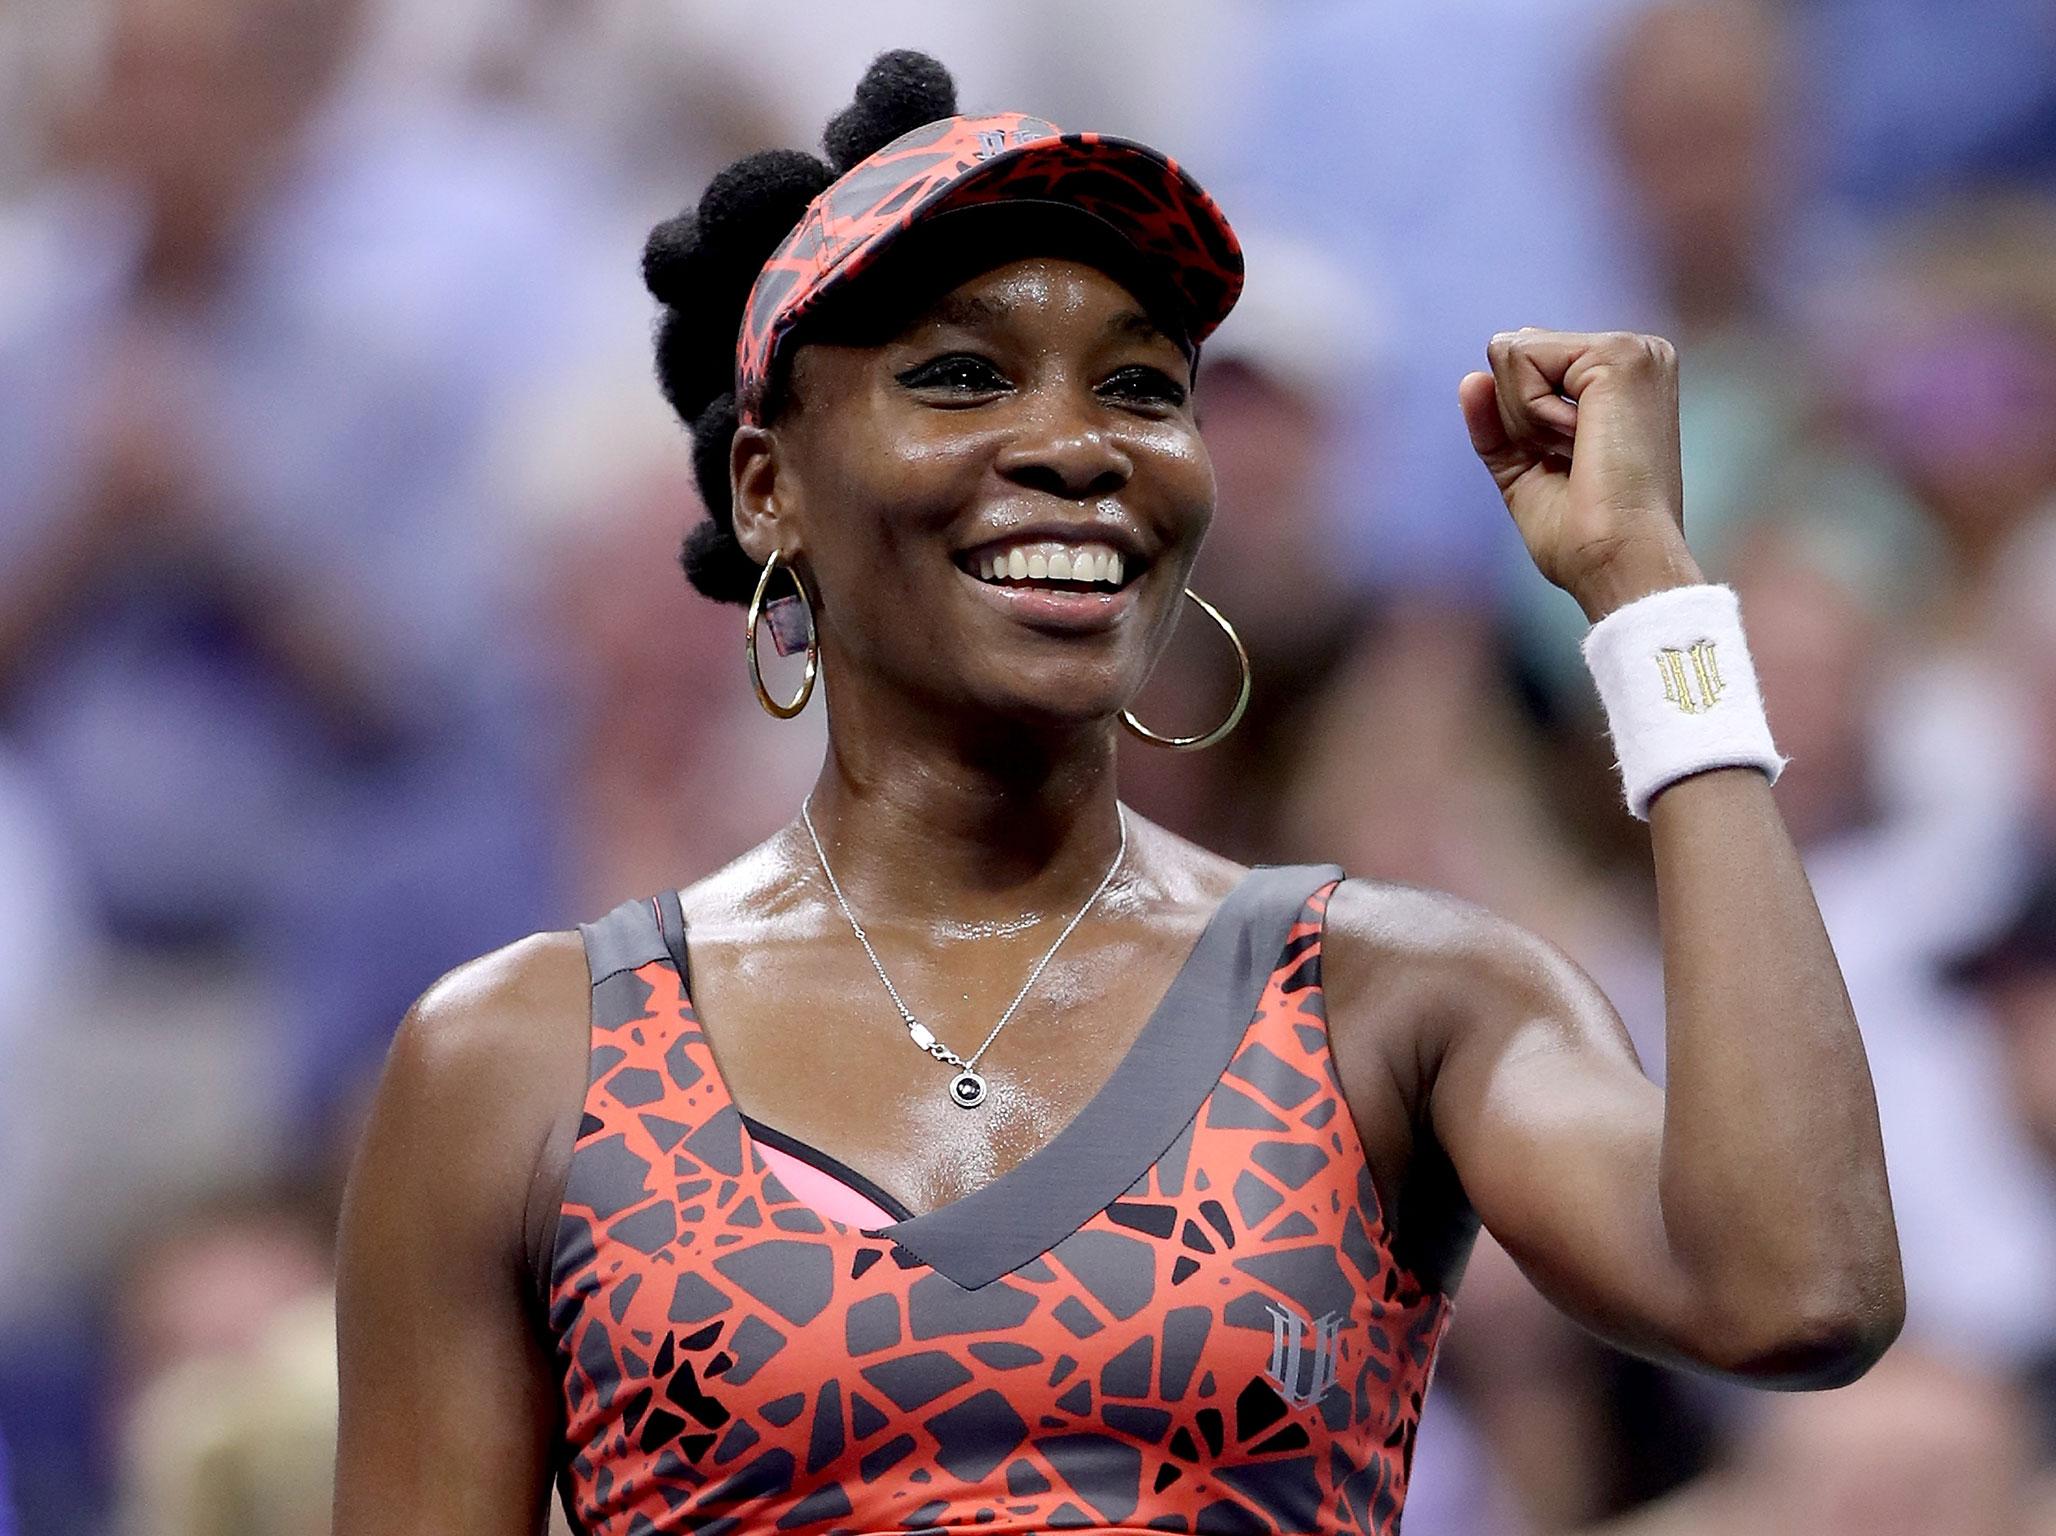 Venus Williams is two wins away from what would be a remarkable Grand Slam title